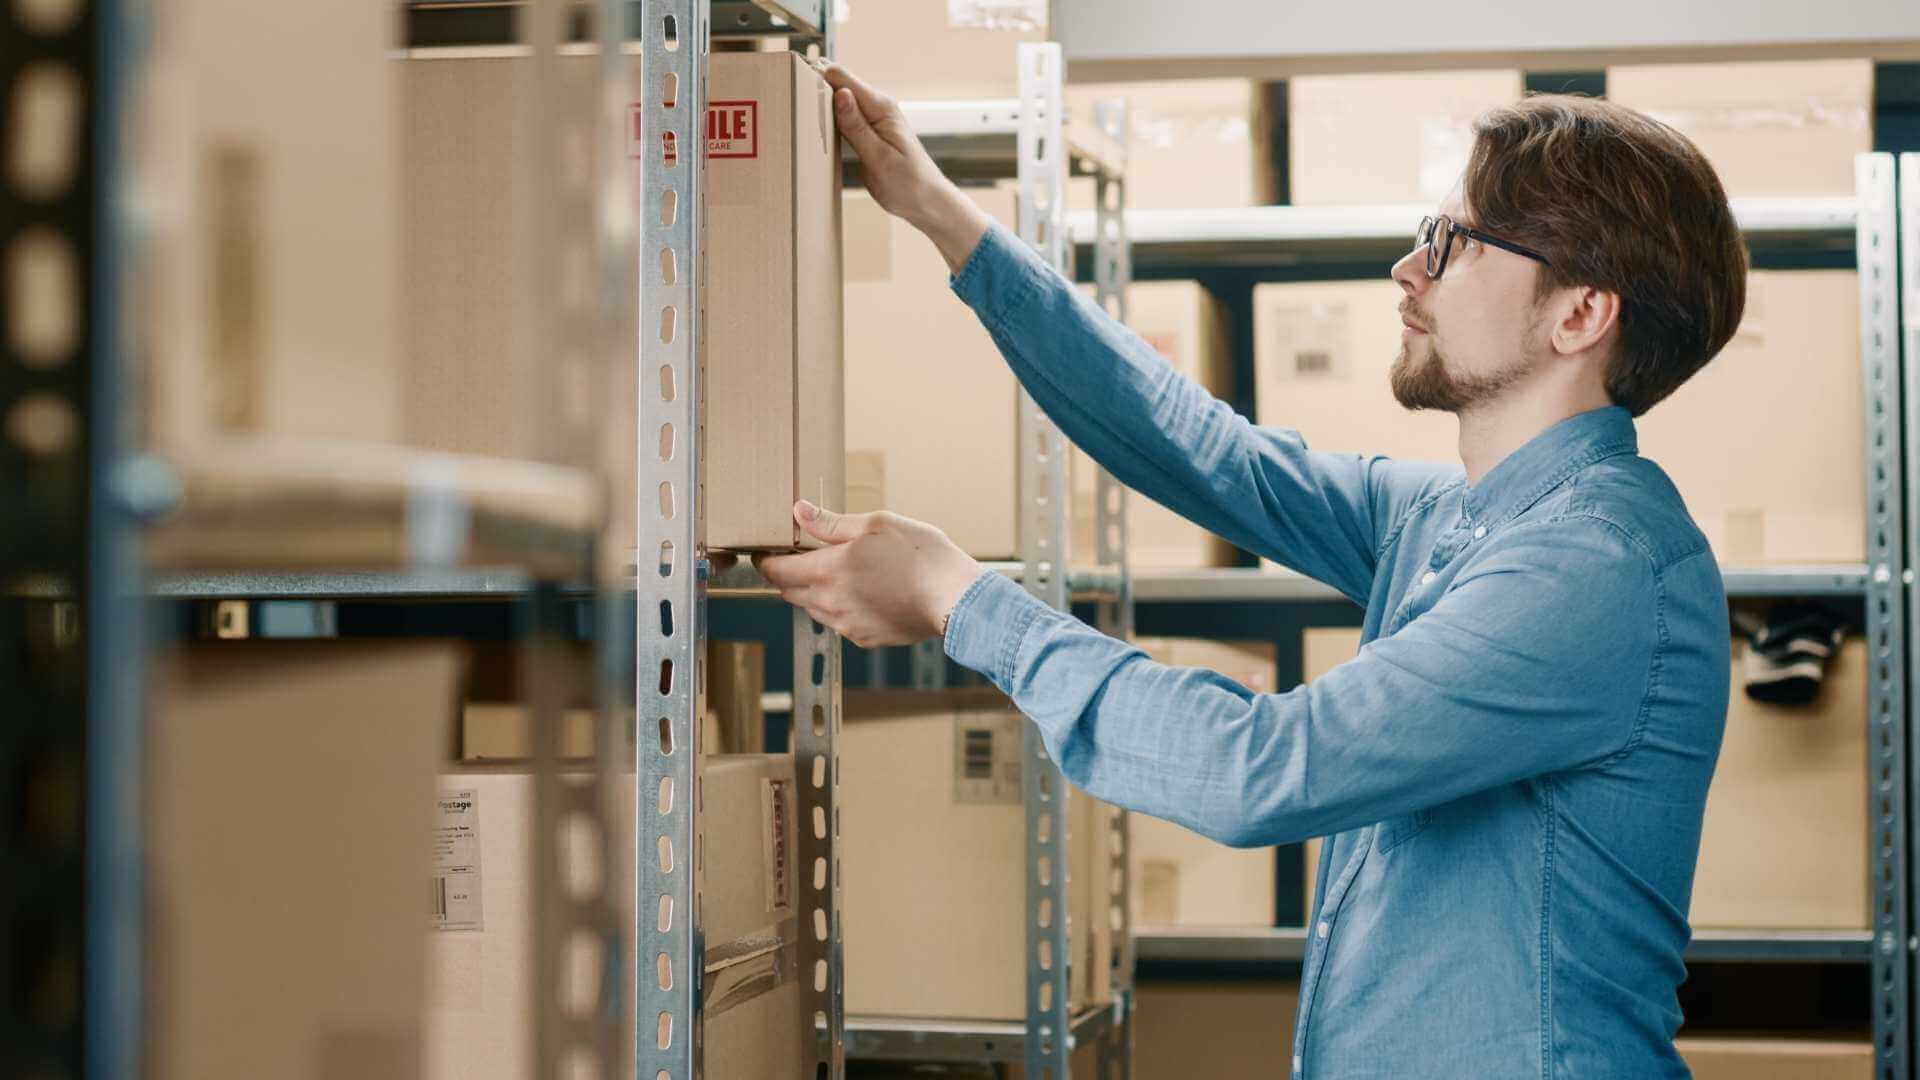 15 Inventory Management Techniques & How They Enable Effective Inventory Management